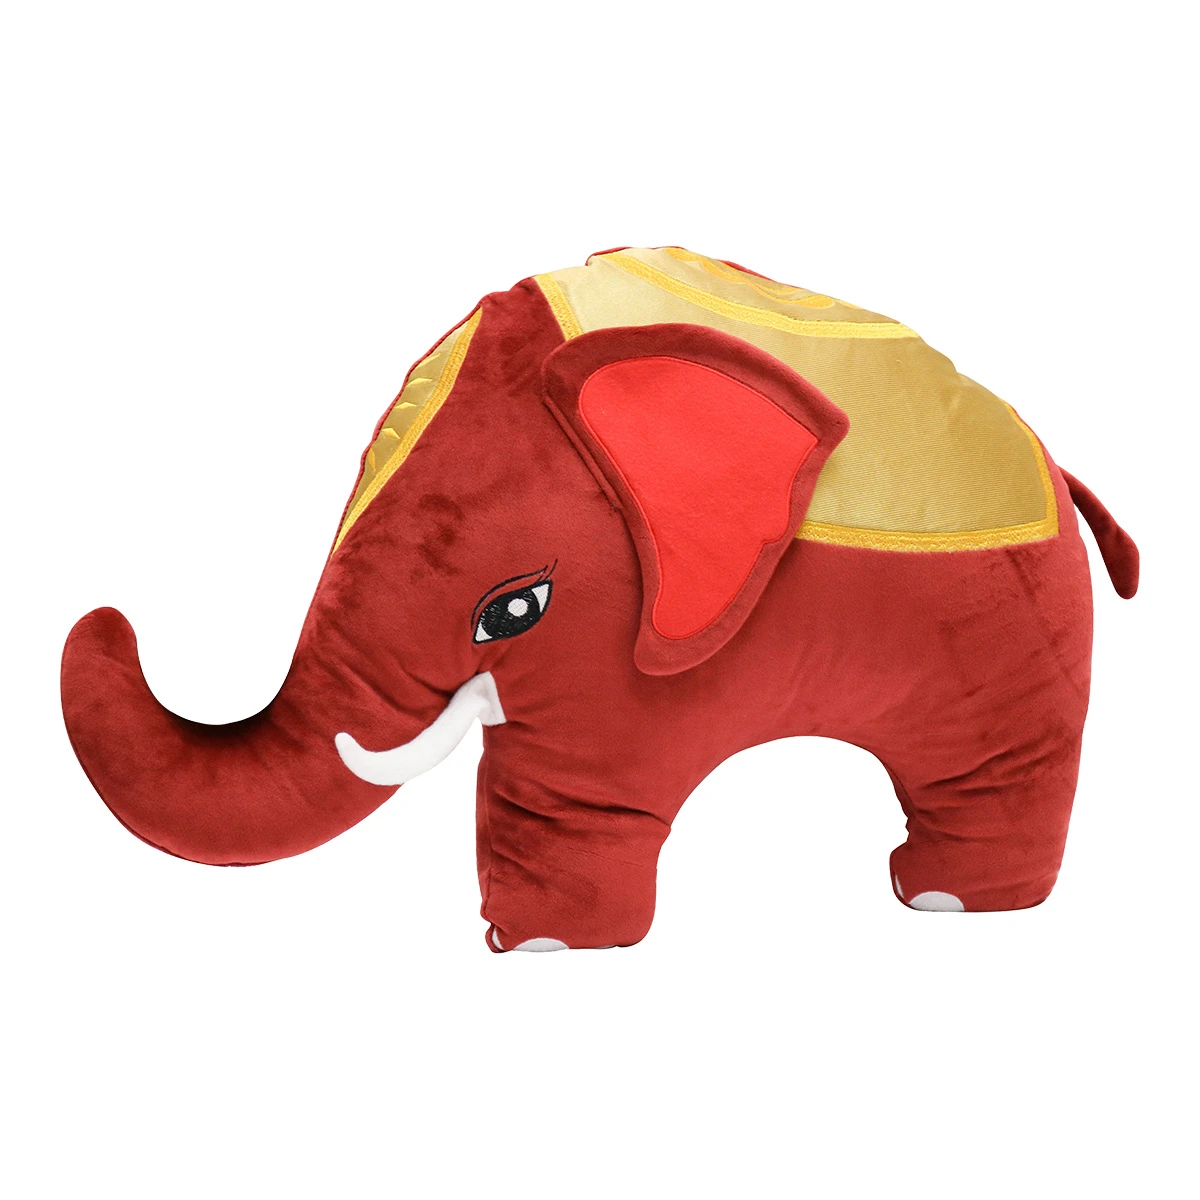 Recycled Polyester Thai Elephant Doll Pillow Blanket (Red)